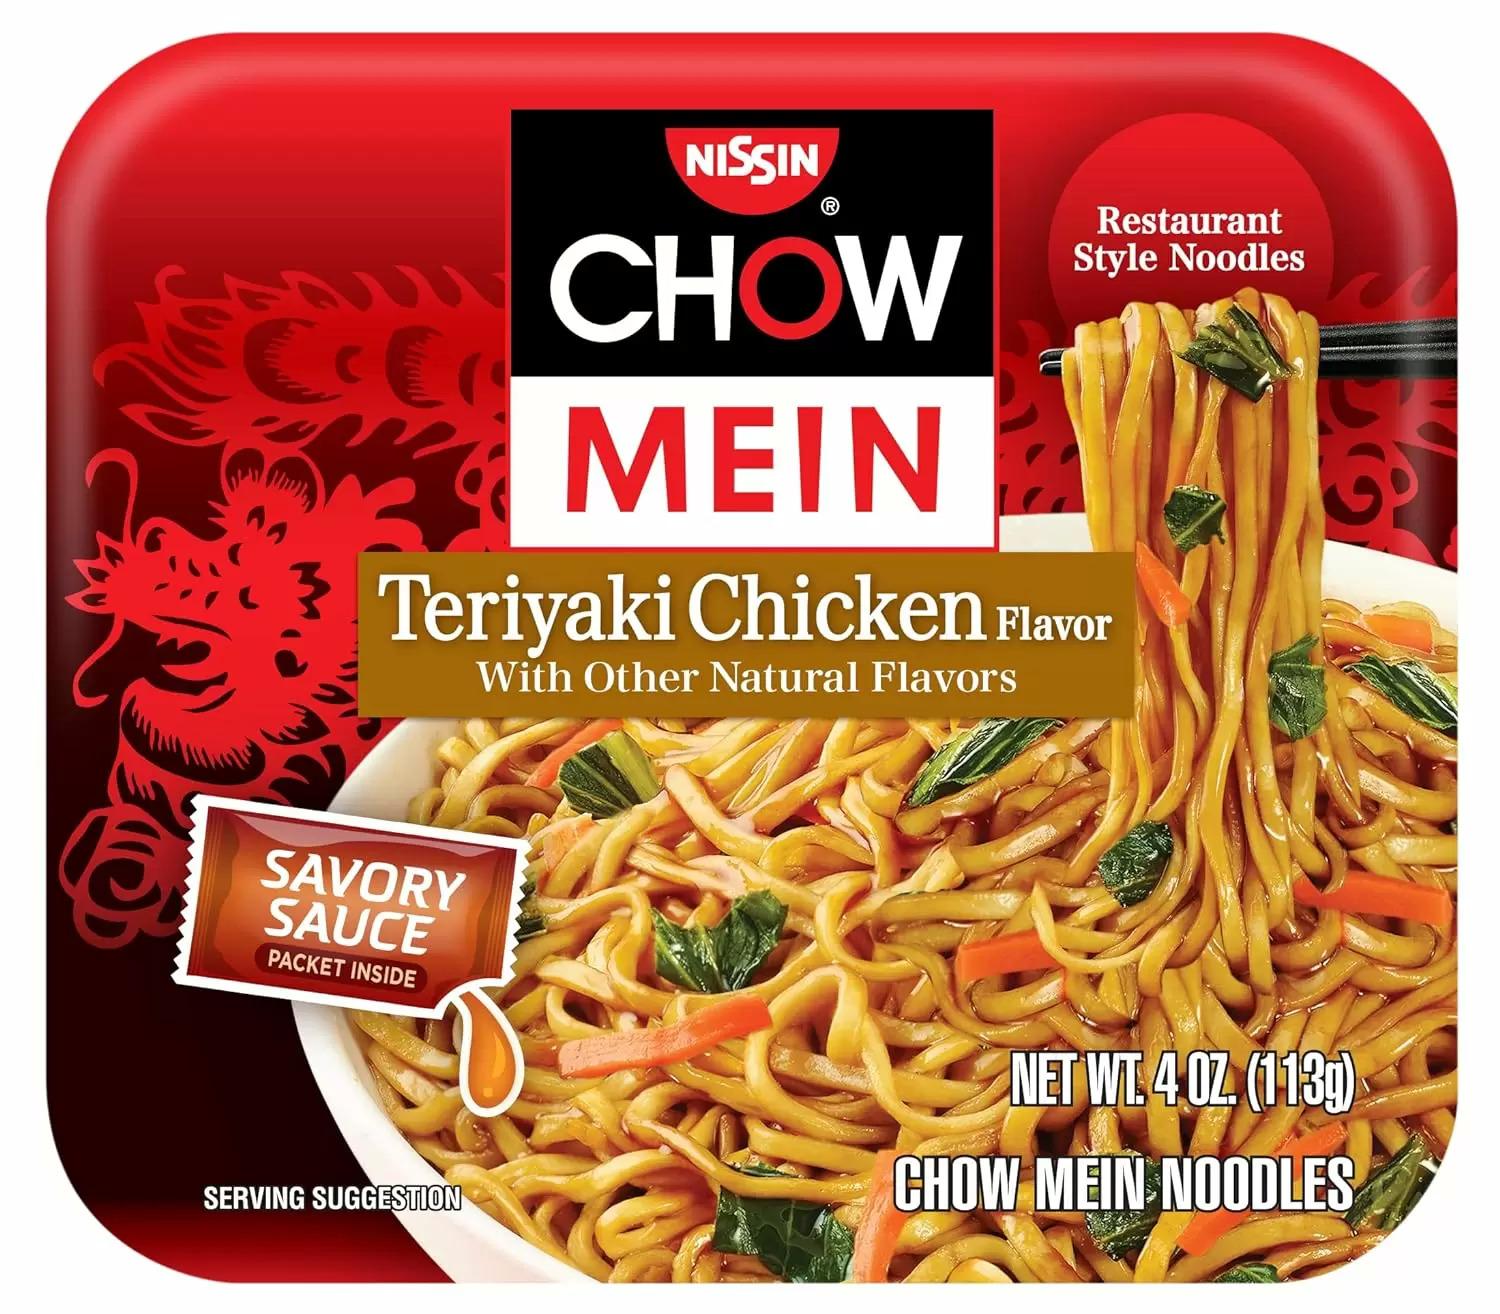 Nissin Chow Mein Teriyaki Chicken Flavor 8 Pack for $8